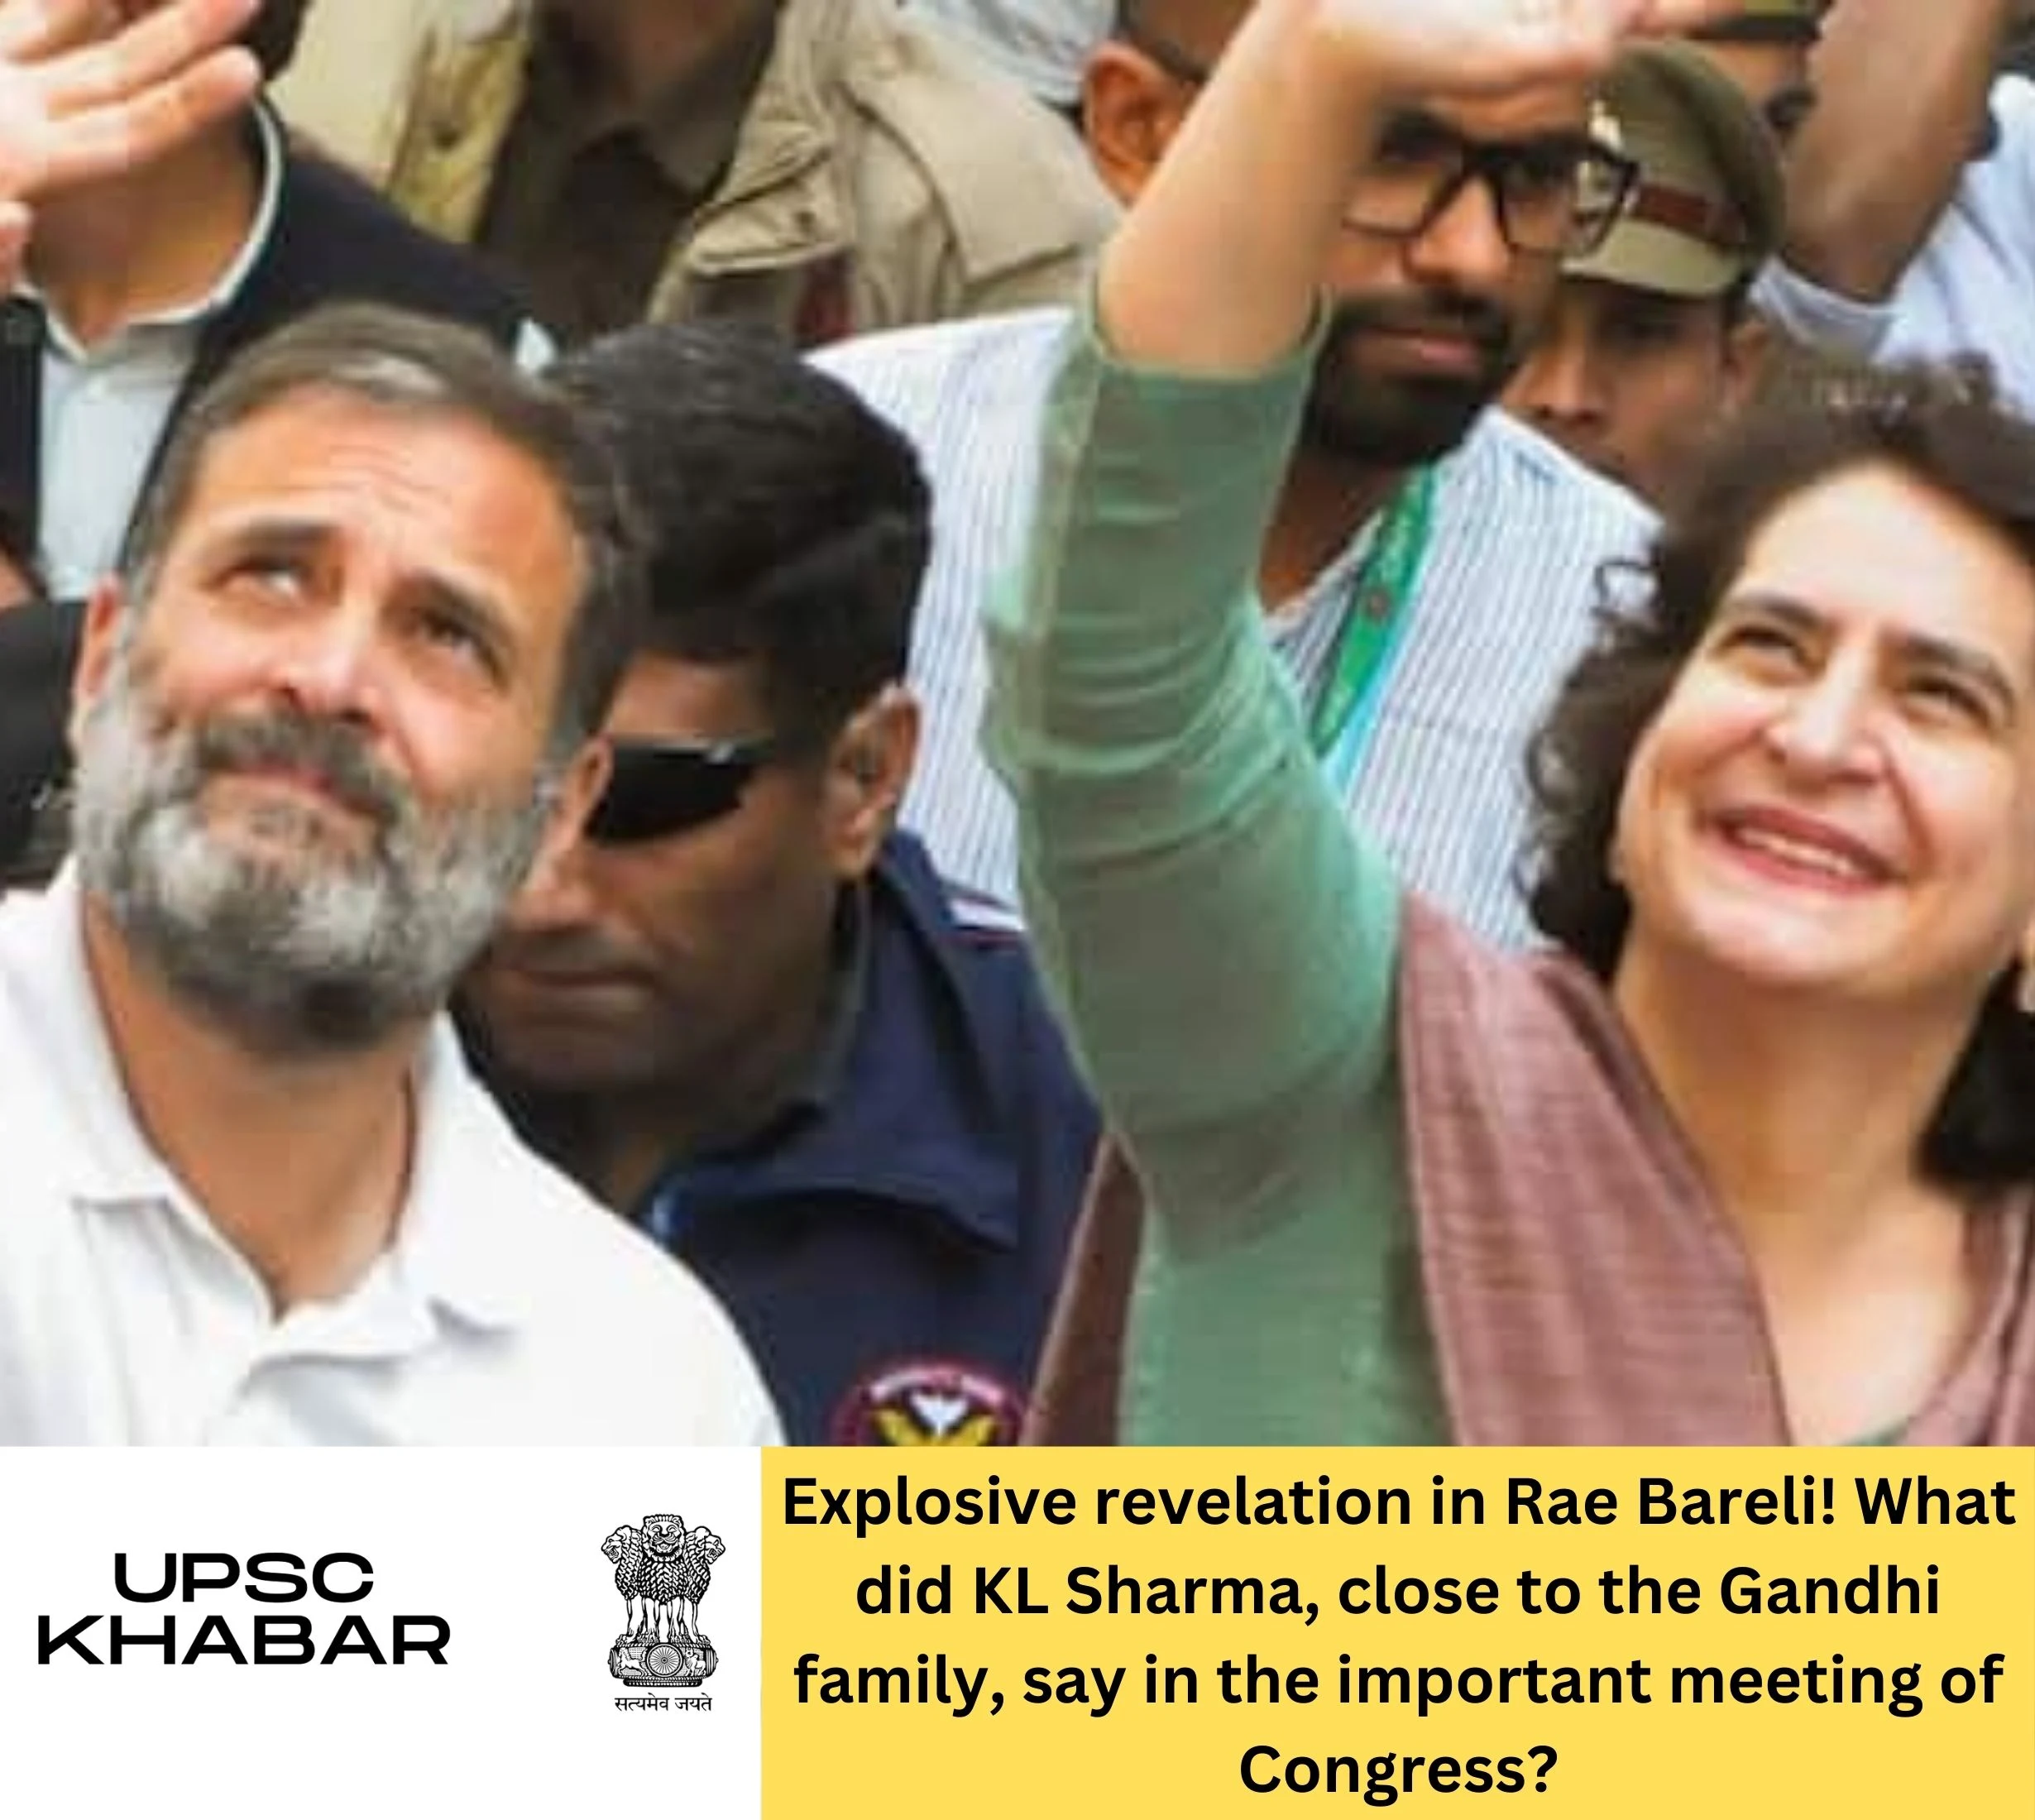 Explosive revelation in Rae Bareli! What did KL Sharma, close to the Gandhi family, say in the important meeting of Congress?